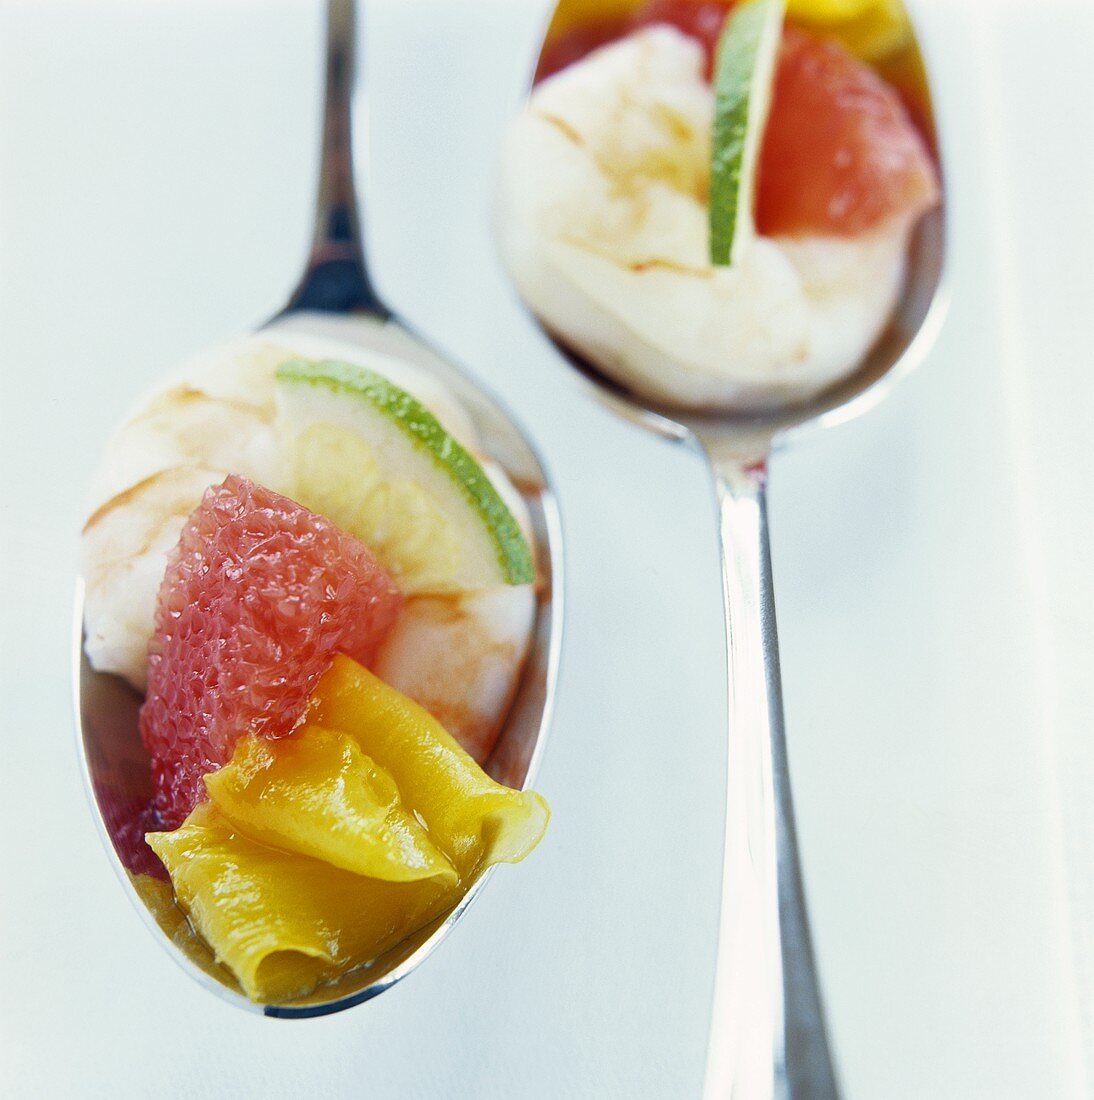 Prawns with lime, grapefruit and mango on two spoons